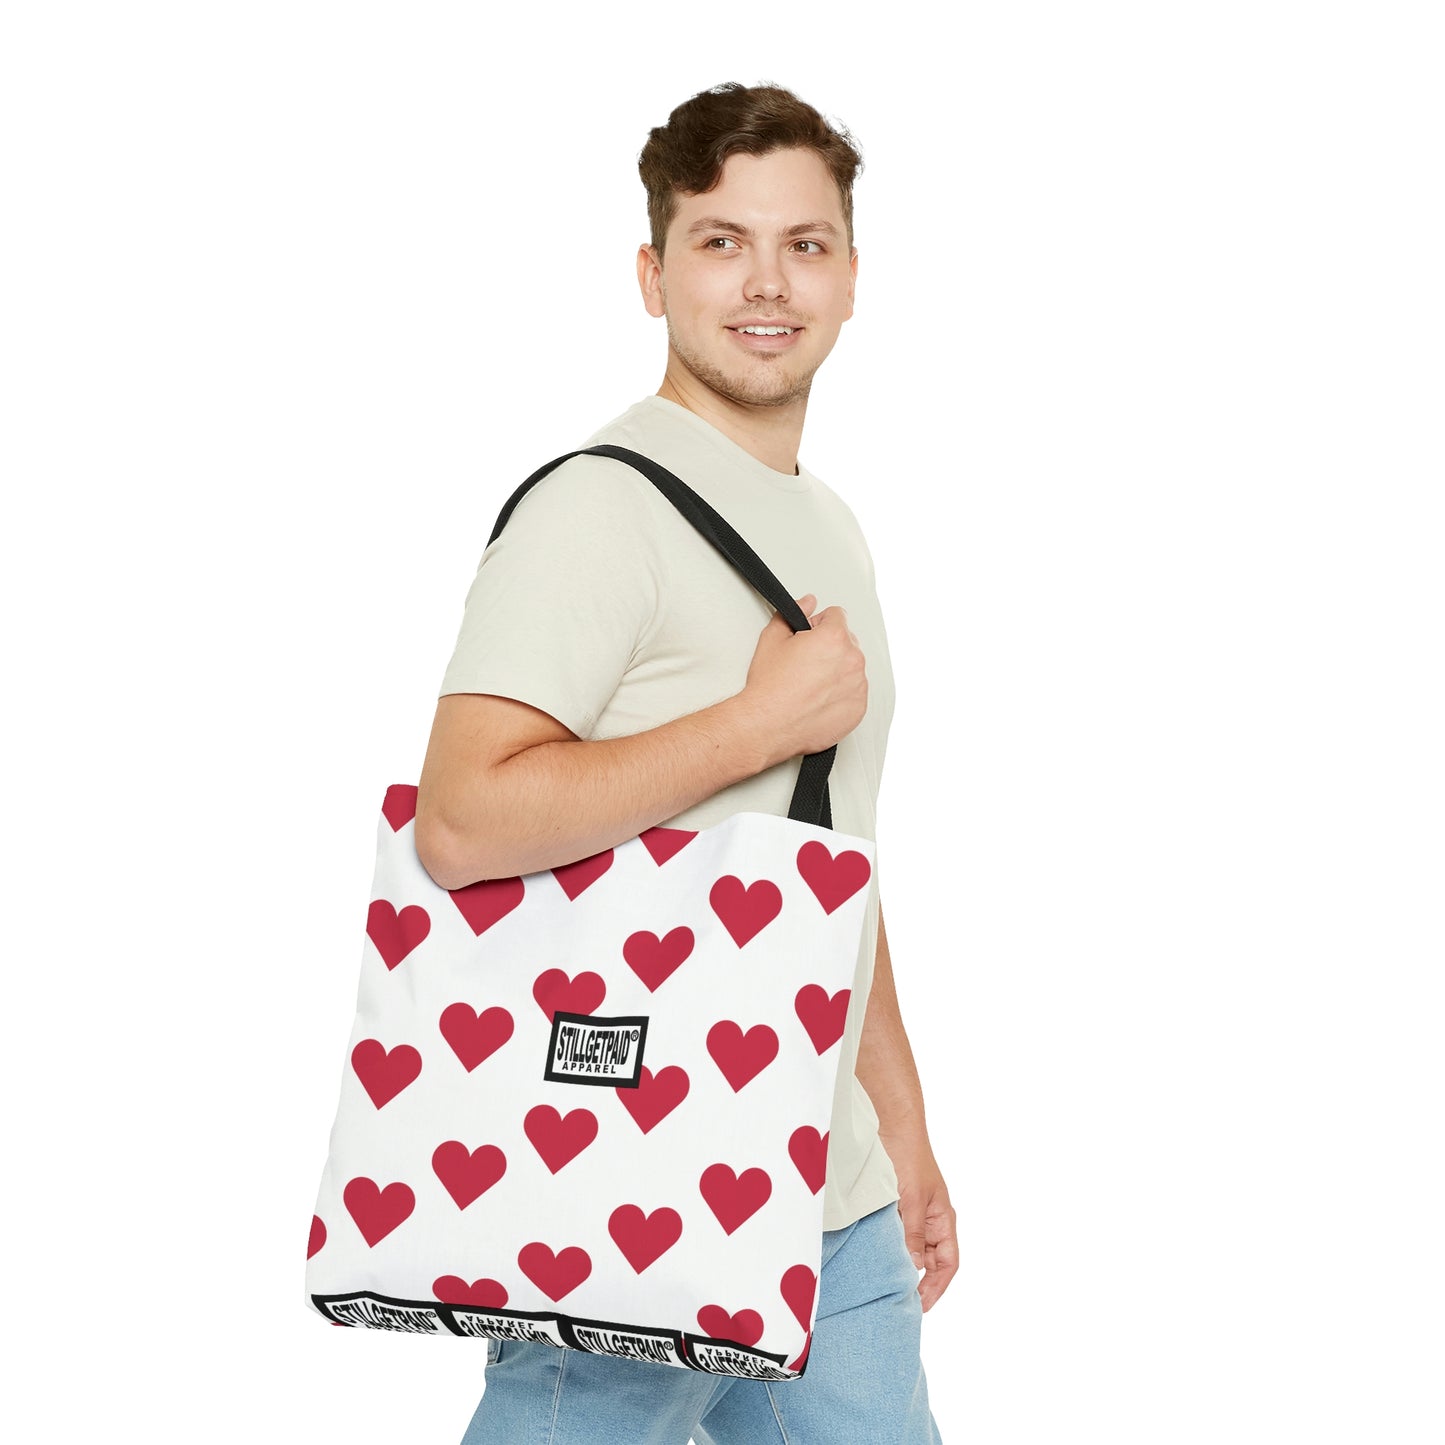 STILLGETPAID® APPAREL WHITE RED HEART TALL AOP Tote Bag